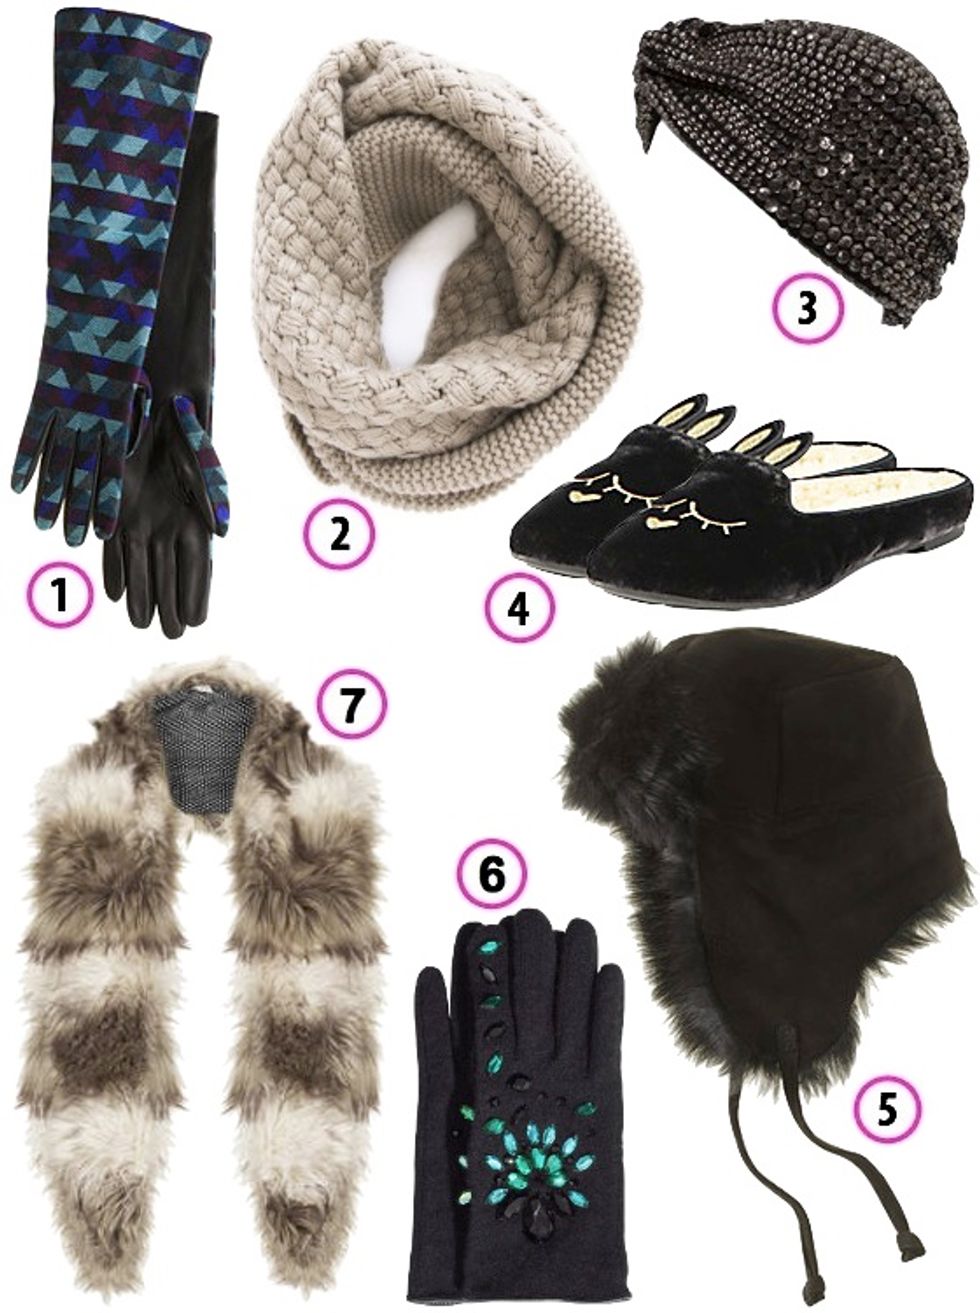 Look of the Week: Chic and Cozy Cold Weather Accessories